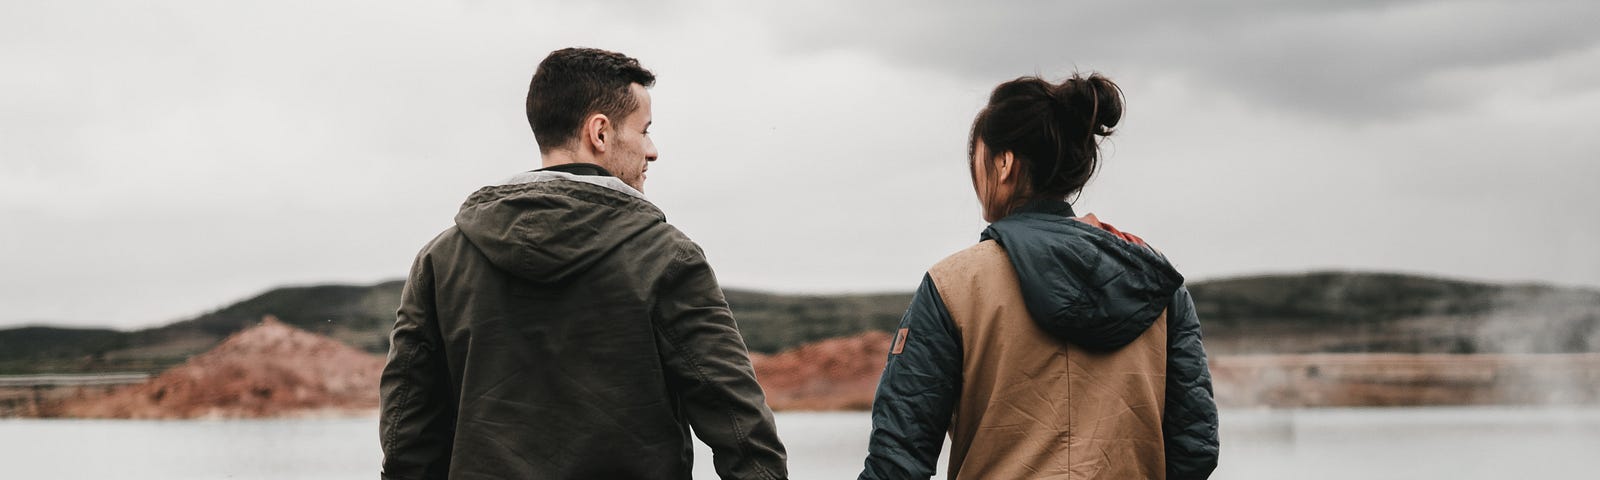 10 Ways to Keep the Spark Alive in a Long-Term Relationship